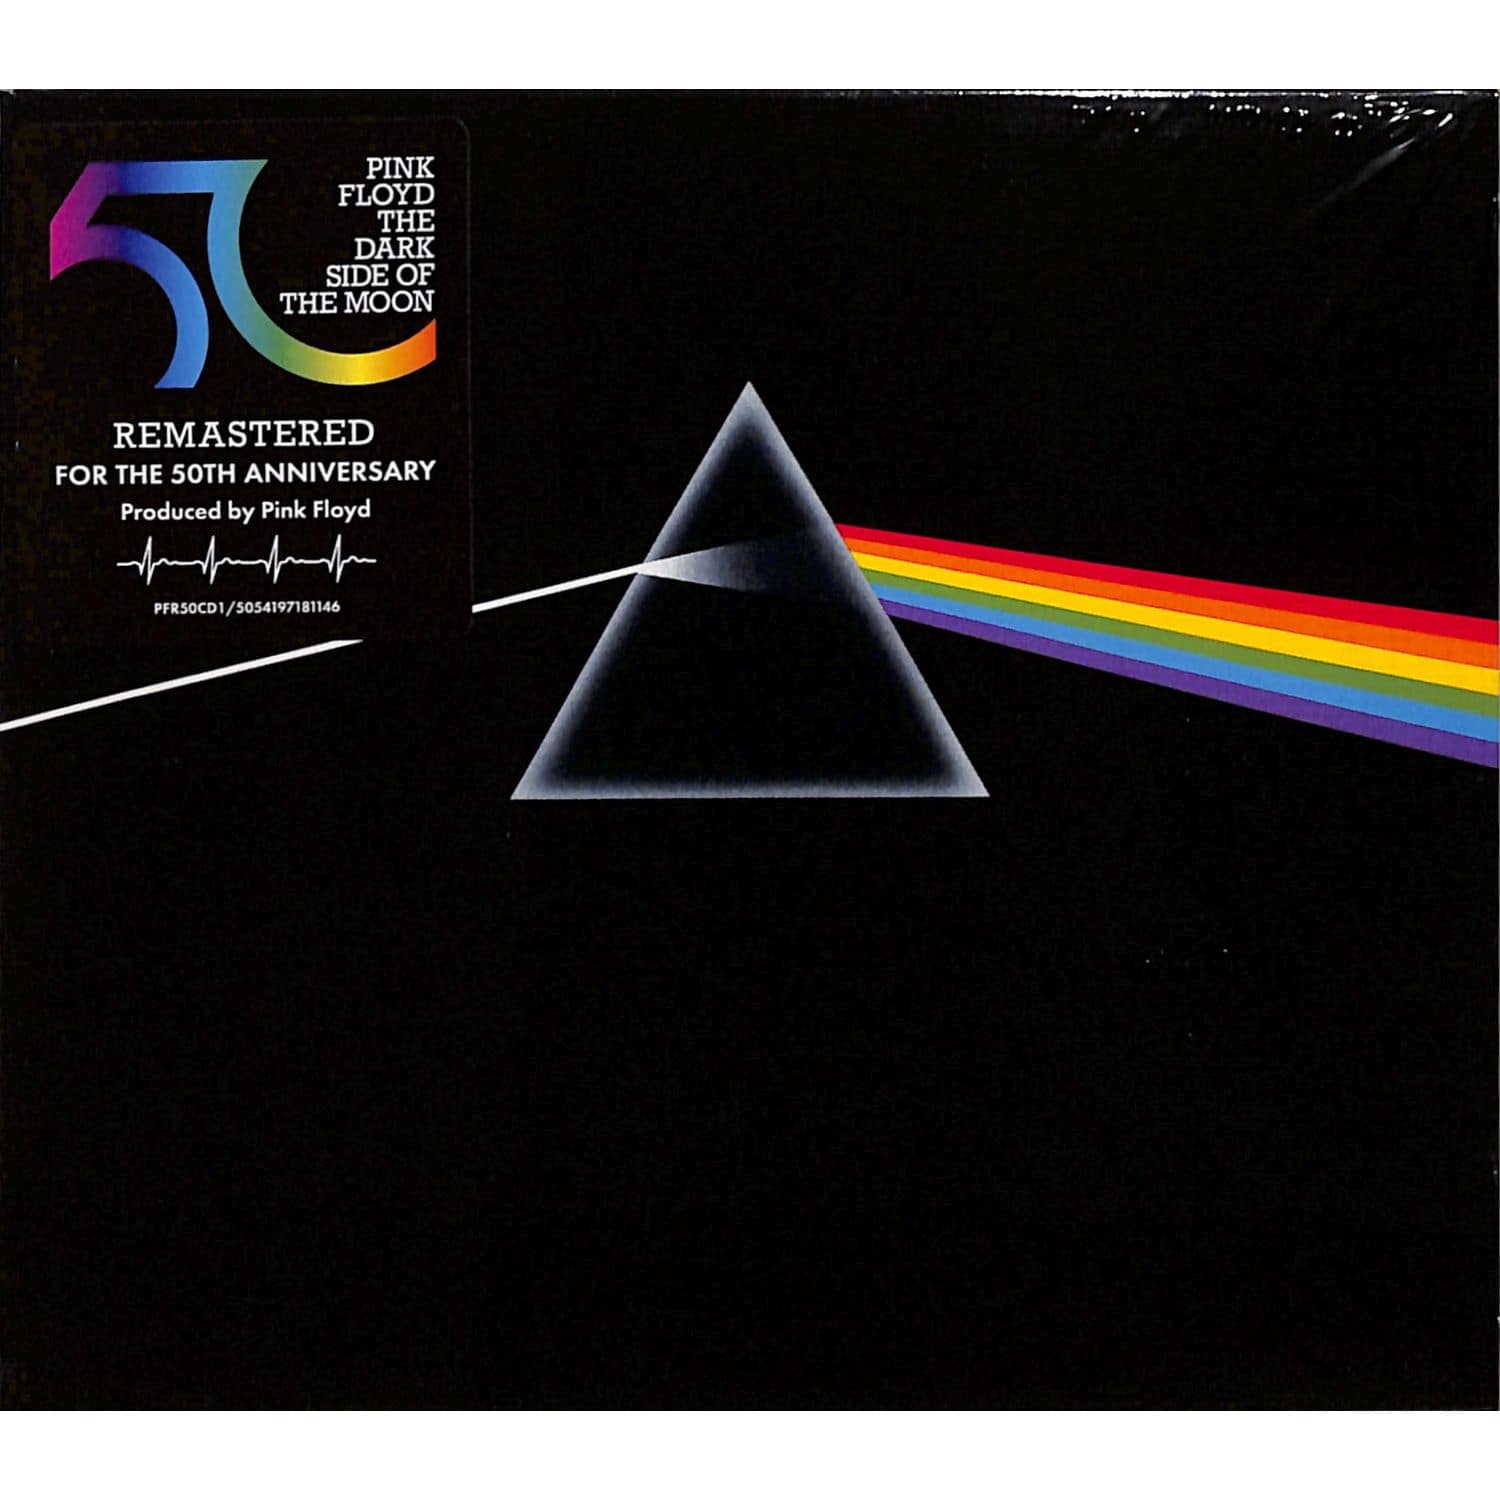 Pink Floyd - THE DARK SIDE OF THE MOON 